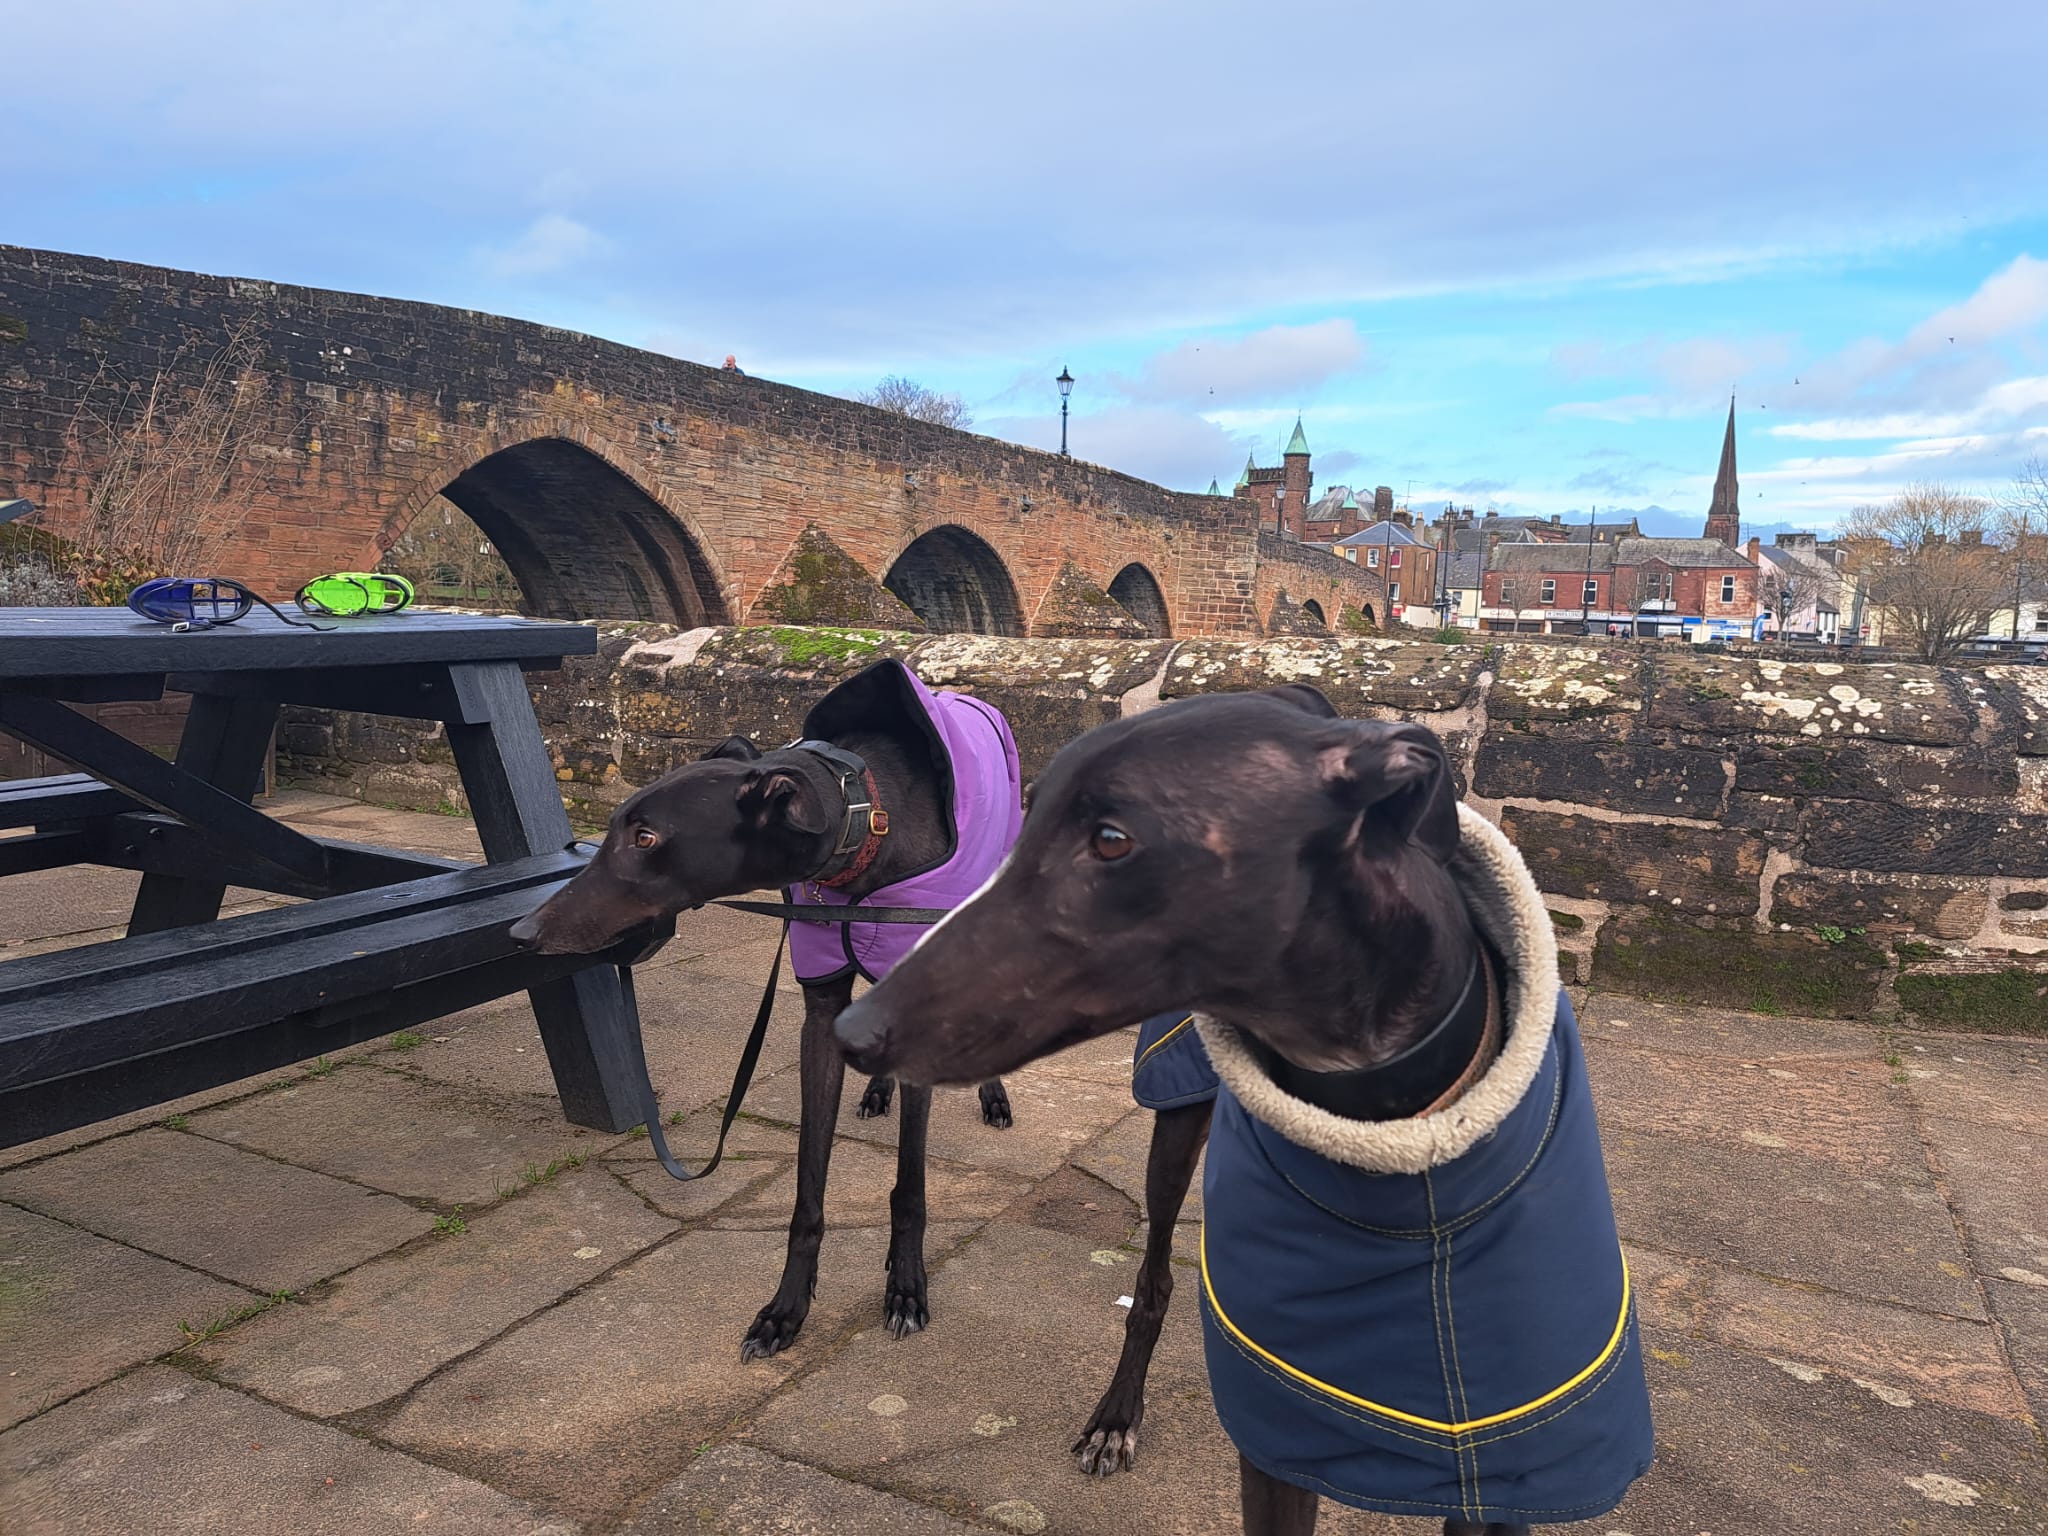 Buddies at the Home of Burns – Visiting Dumfries With Dogs